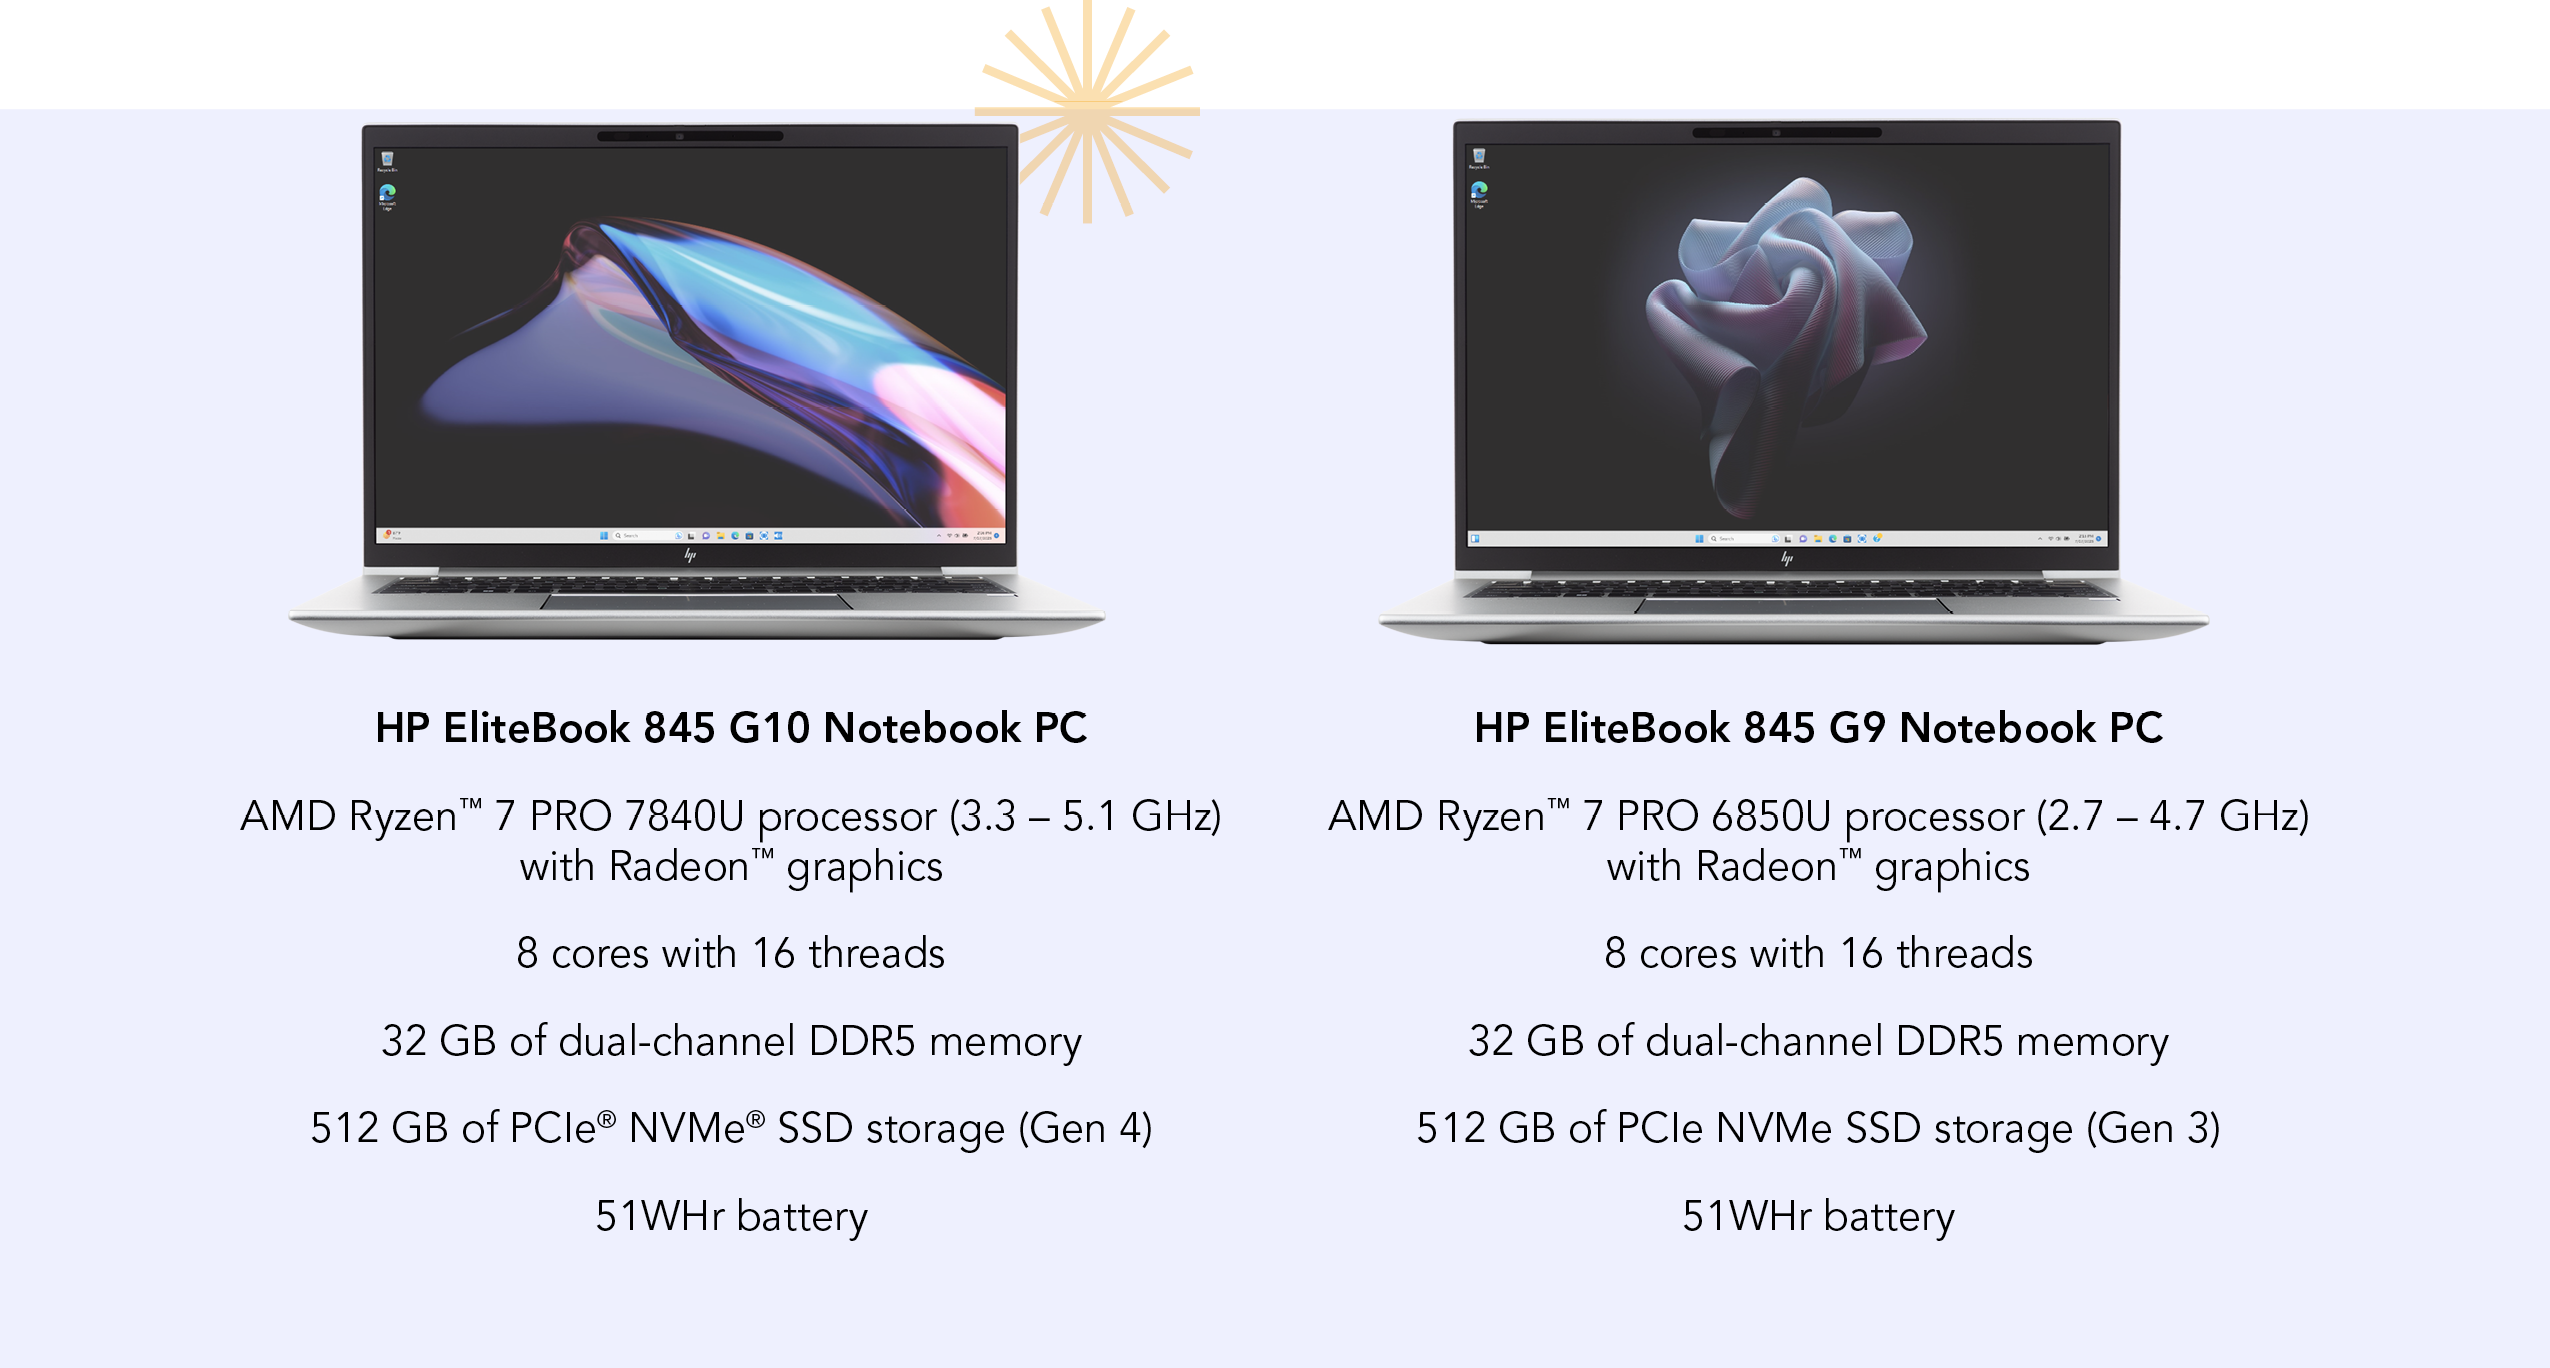 Comparison of key system configuration specifications. HP EliteBook 845 G10 Notebook PC Speficiations; AMD Ryzen™ 7 PRO 7840U processor (3.3 – 5.1 GHz) with AMD Radeon™ graphics, 8 cores with 16 threads, 32 GB of dual-channel DDR5 memory,512 GB of PCIe® NVMe® SSD storage, 51WHr battery.  HP EliteBook 845 G9 Notebook PC Speficiations: AMD Ryzen™ 7 PRO 6850U processor (2.7 – 4.7 GHz) with Radeon™ graphics; 8 cores with 16 threads; 32 GB of dual-channel DDR5 memory; 512 GB of PCIe NVMe SSD storage (Gen 3); 51WHr battery